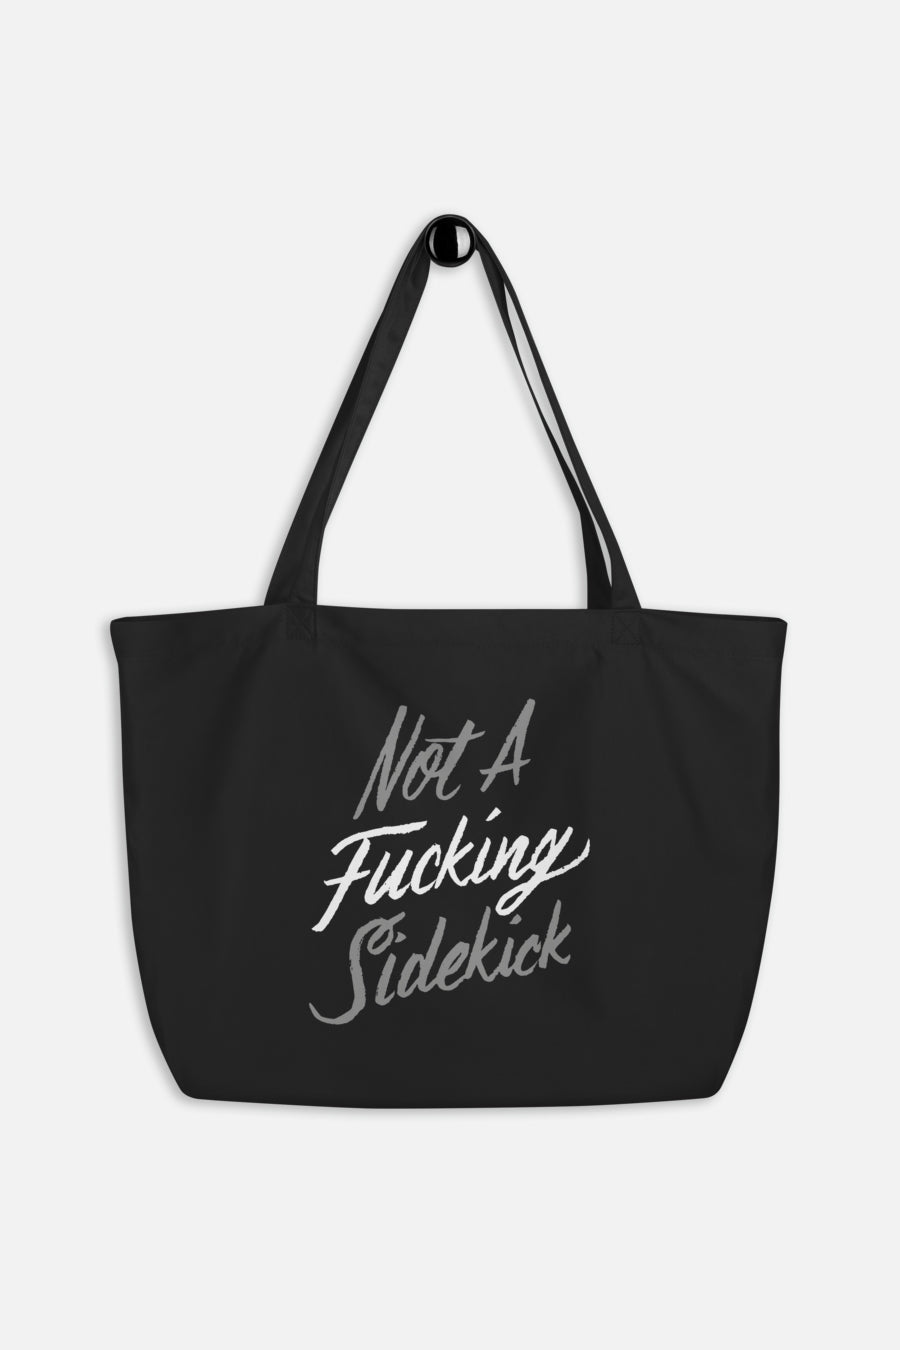 Not a Sidekick Large Eco Tote Bag | V.E. Schwab Official Collection